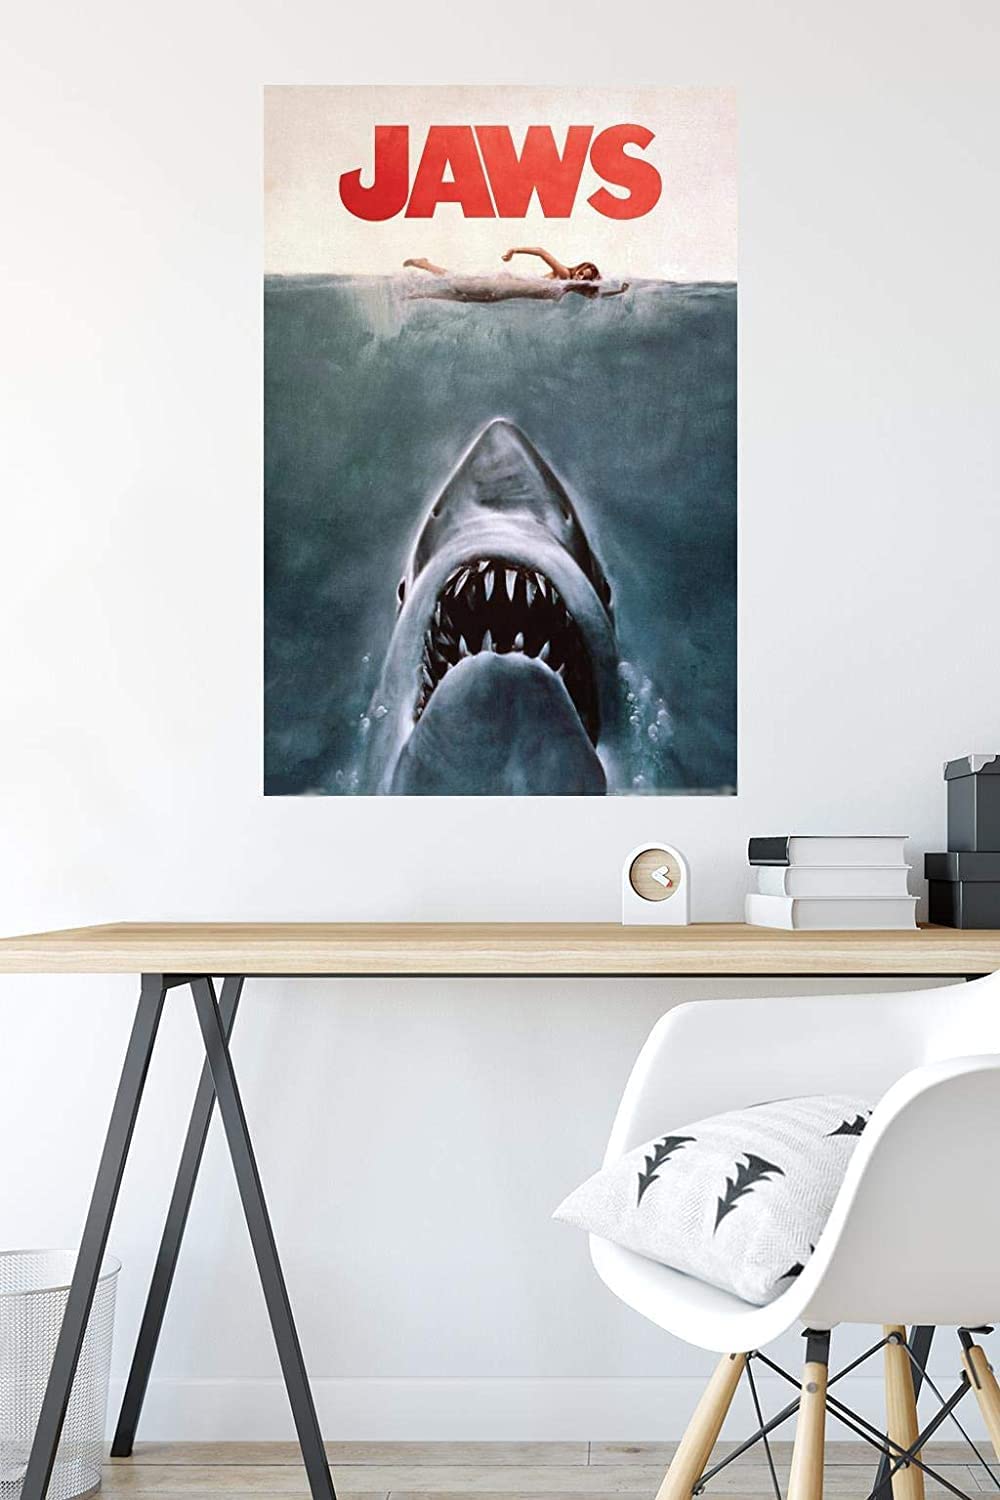 Big poster for the movie jaws - 90x60 CM